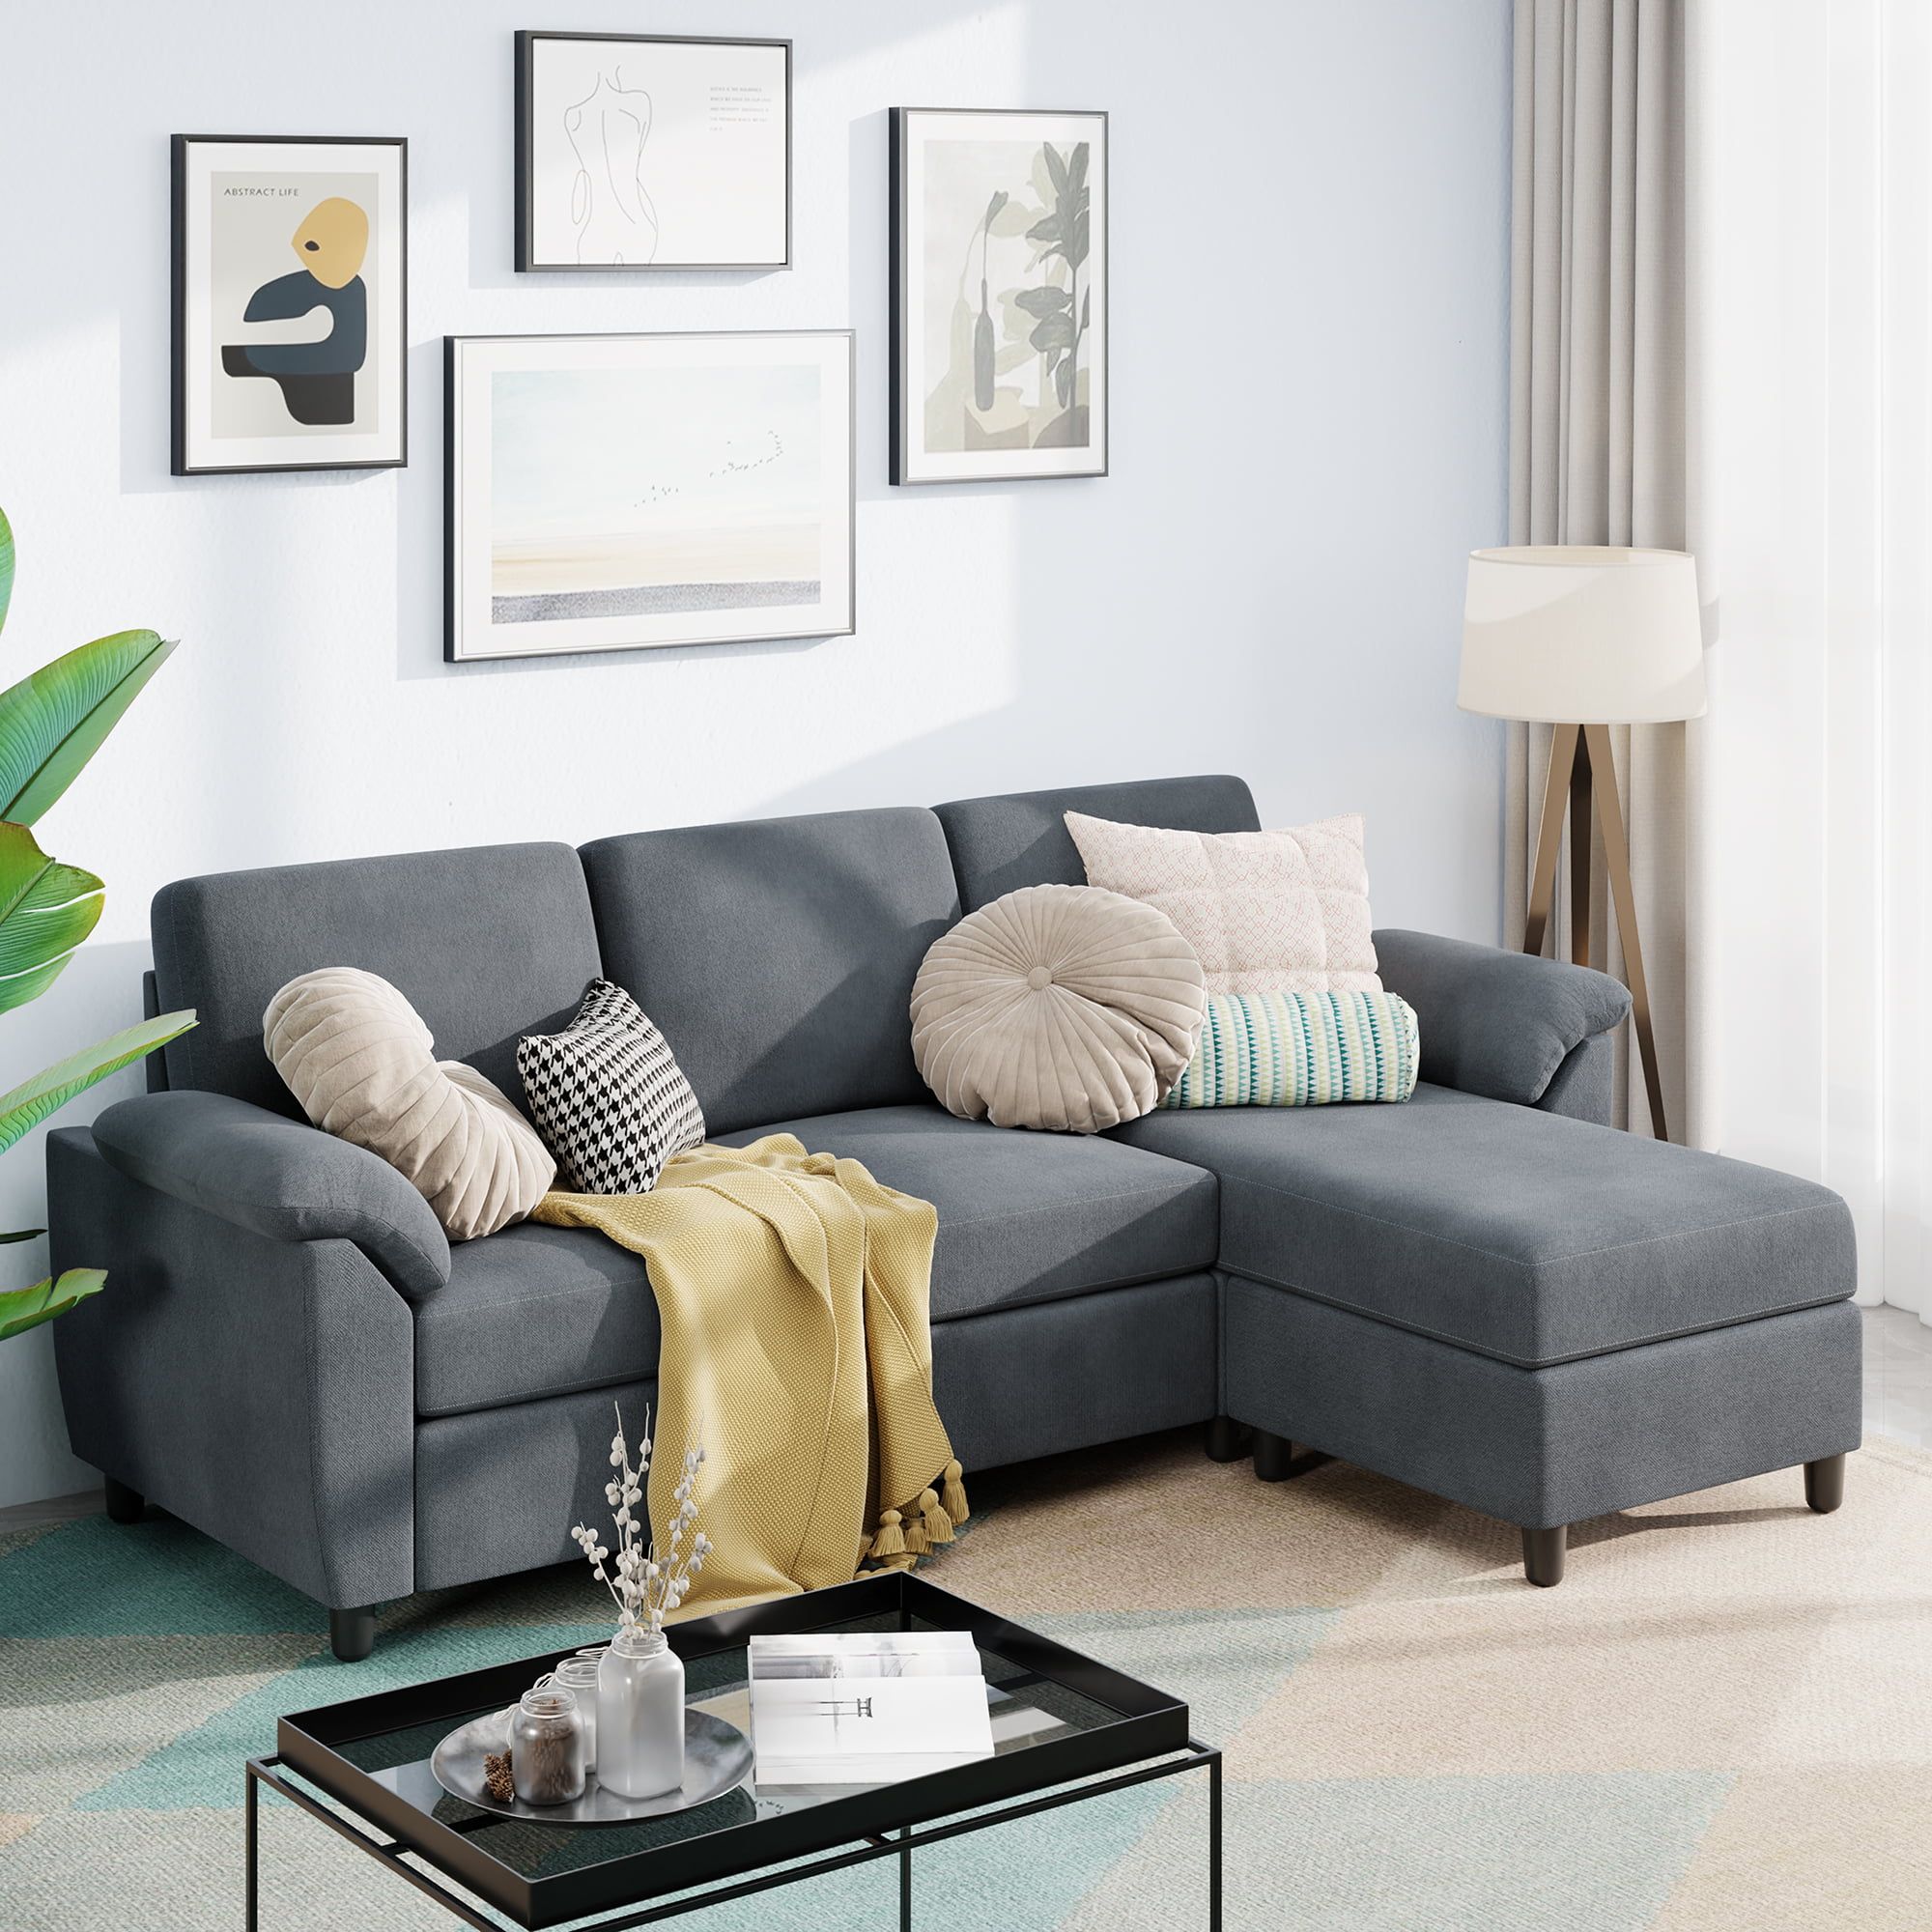 Sobaniilo 79" Convertible Sectional Sofa Couch, 3 Seat L Shaped Sofa With  Removable Pillows Linen Fabric Small Couch Mid Century For Living Room,  Apartment And Office (Gray) – Walmart With Regard To Convertible Sectional Sofa Couches (Photo 6 of 15)